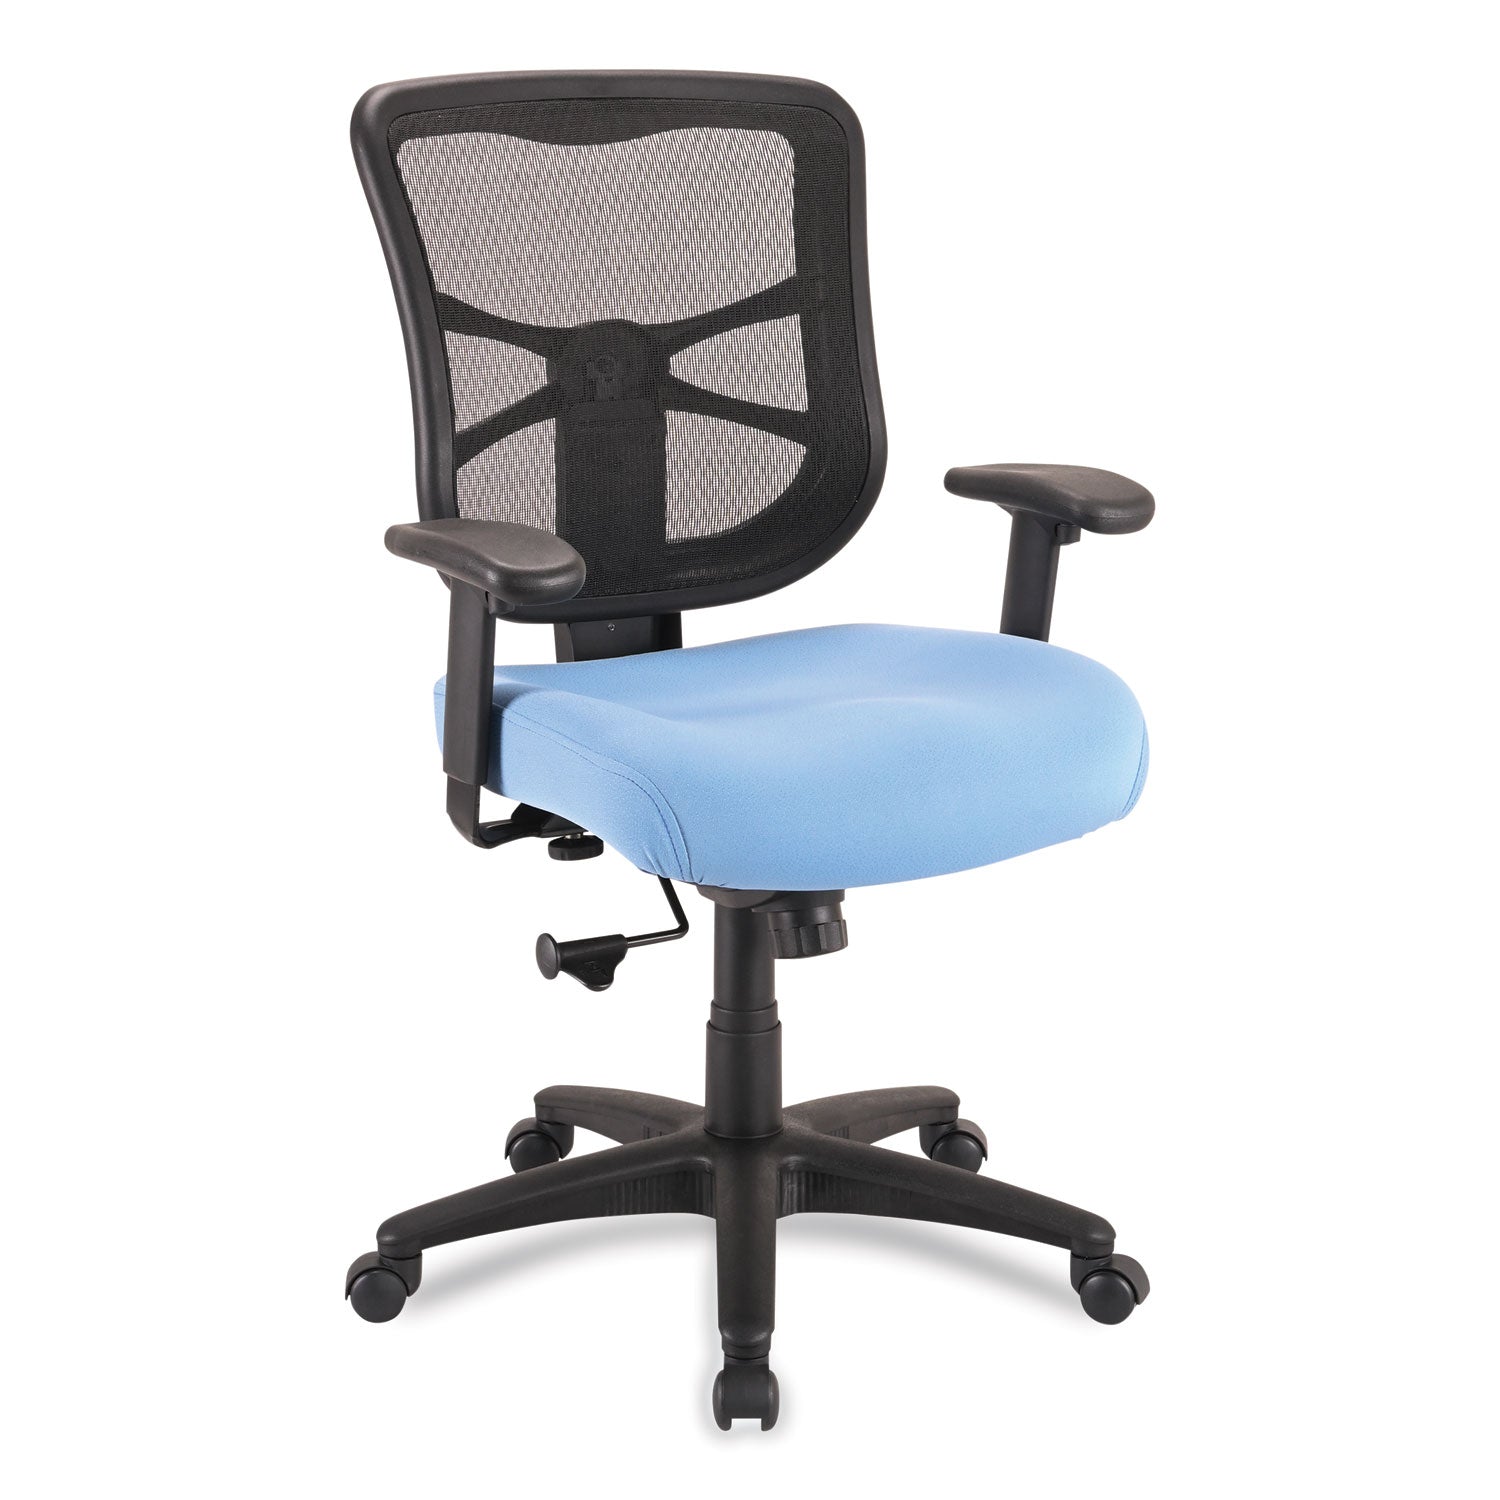 alera-elusion-series-mesh-mid-back-swivel-tilt-chair-supports-up-to-275-lb-179-to-218-seat-height-light-blue-seat_aleel42bme70b - 1